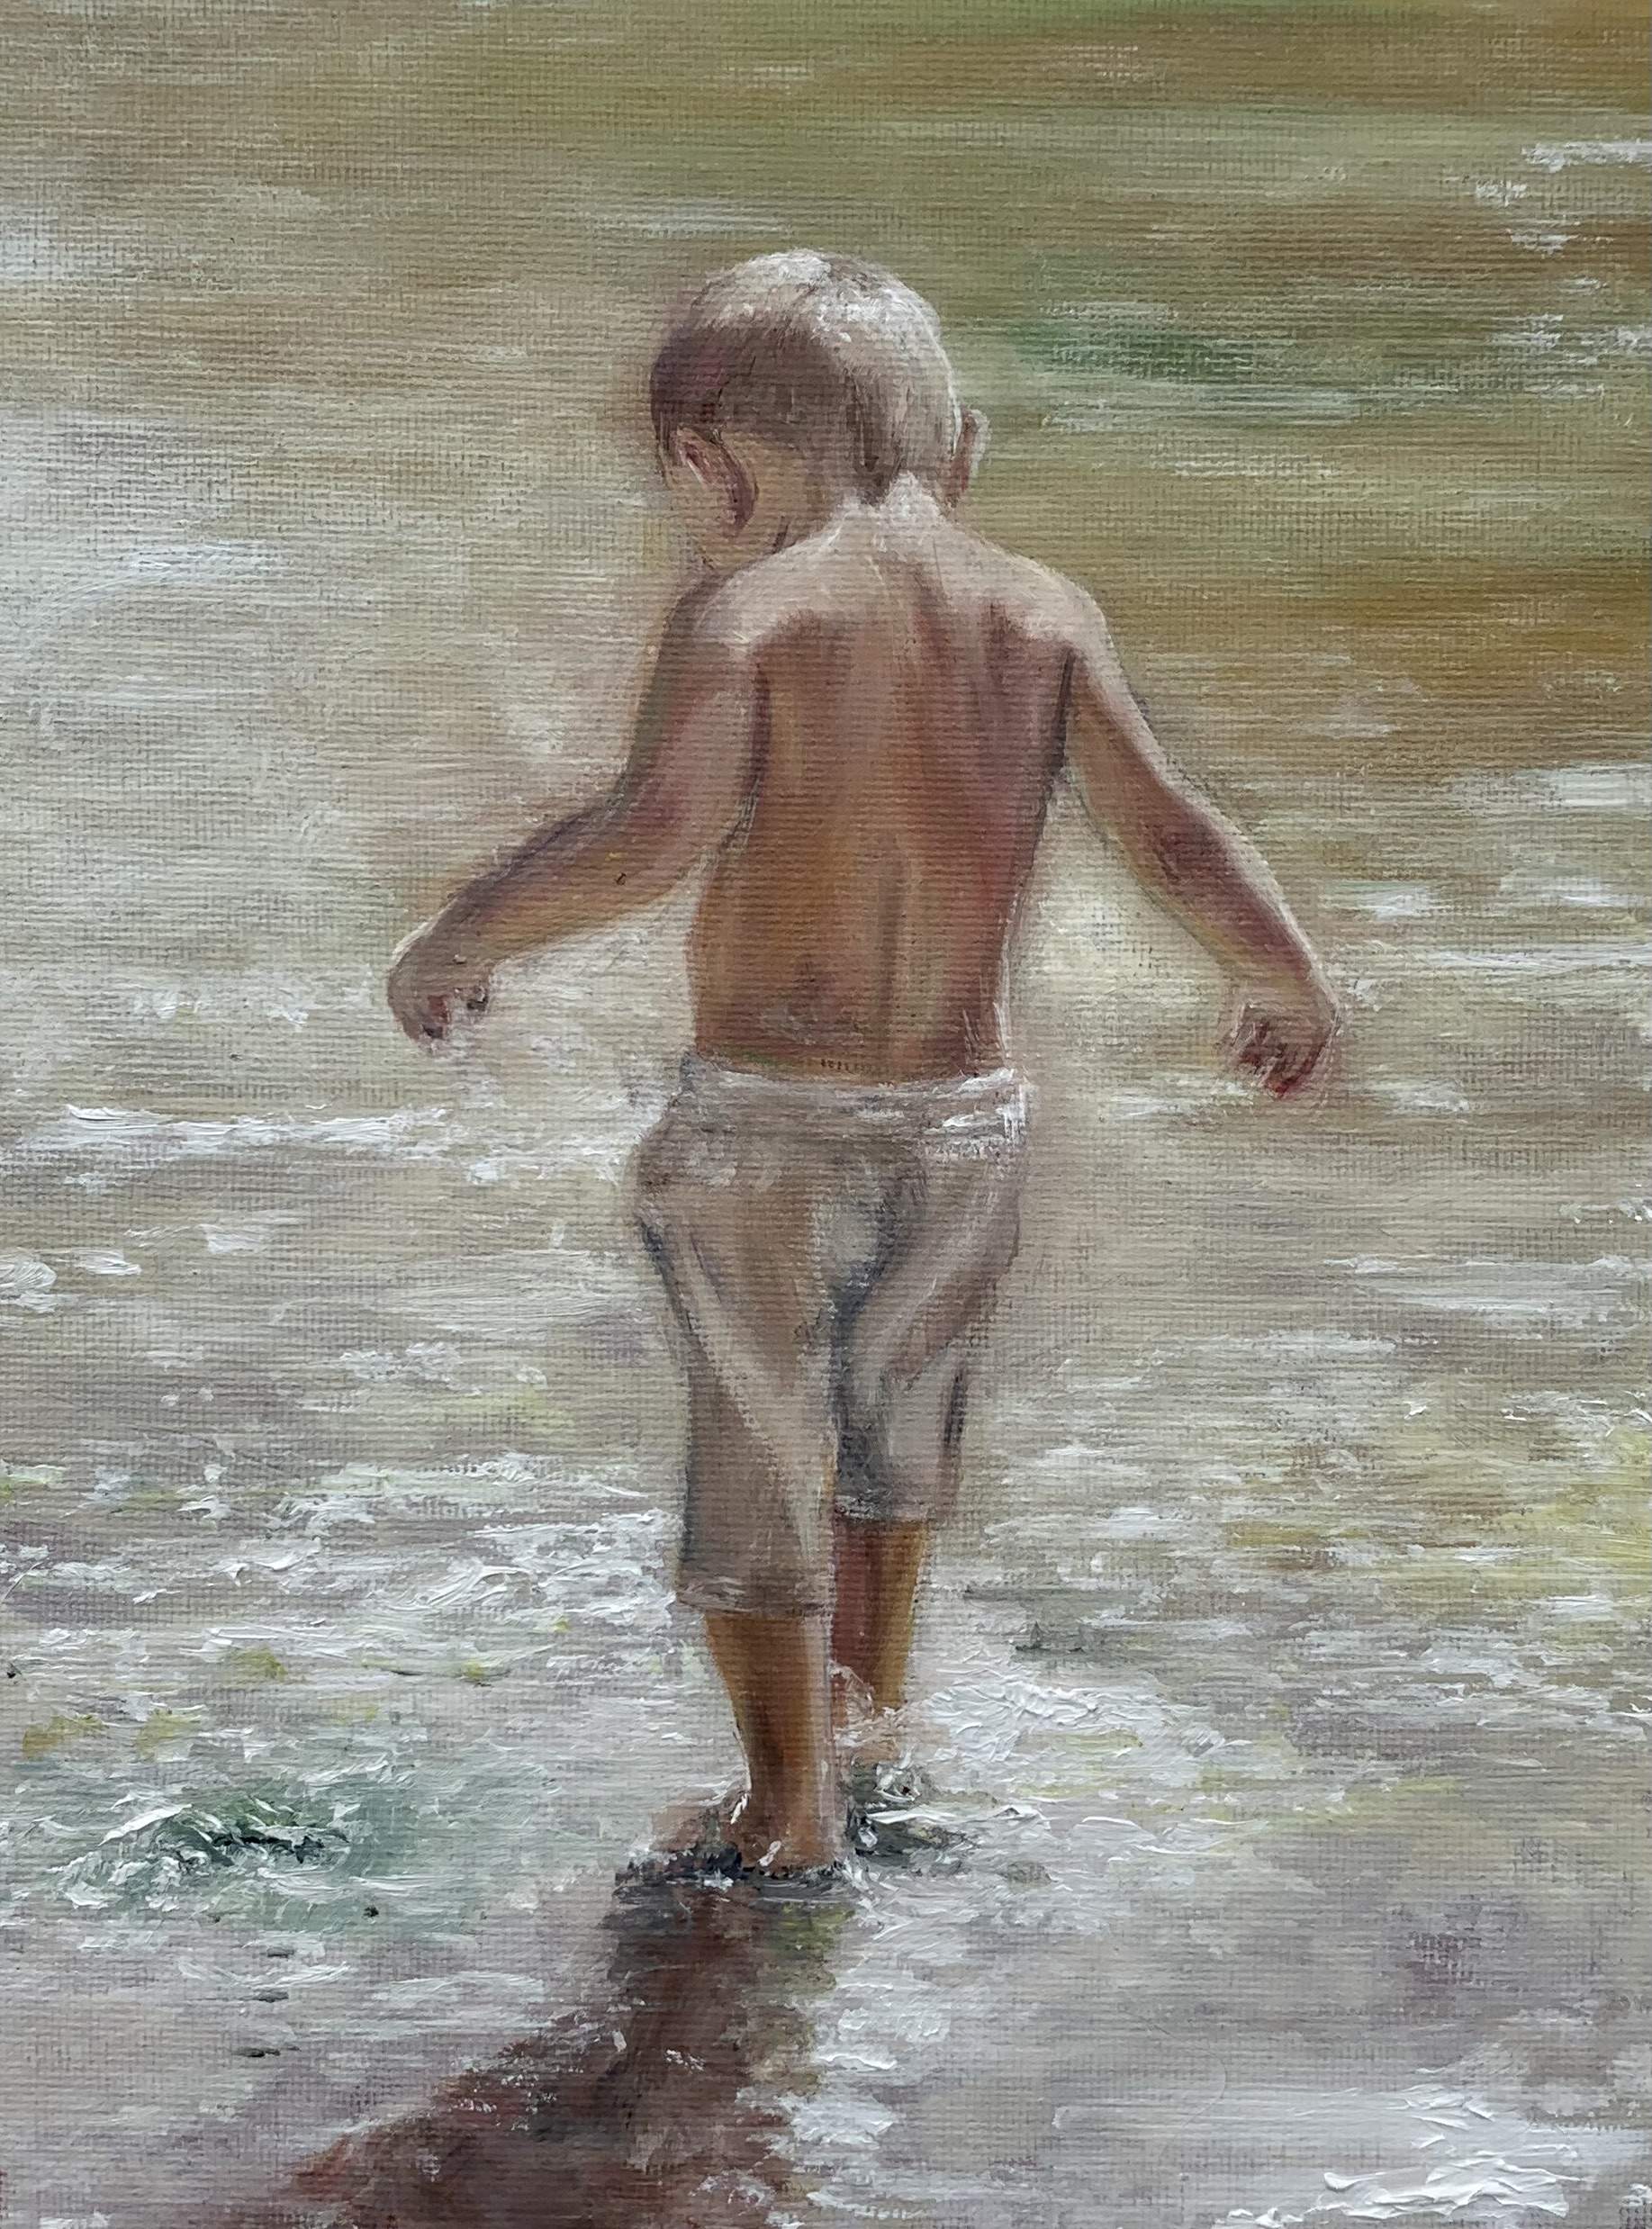 Oil on Canvas board  - 7 x 9.5 inches (unframed) -  €250 (Prints €75.00)